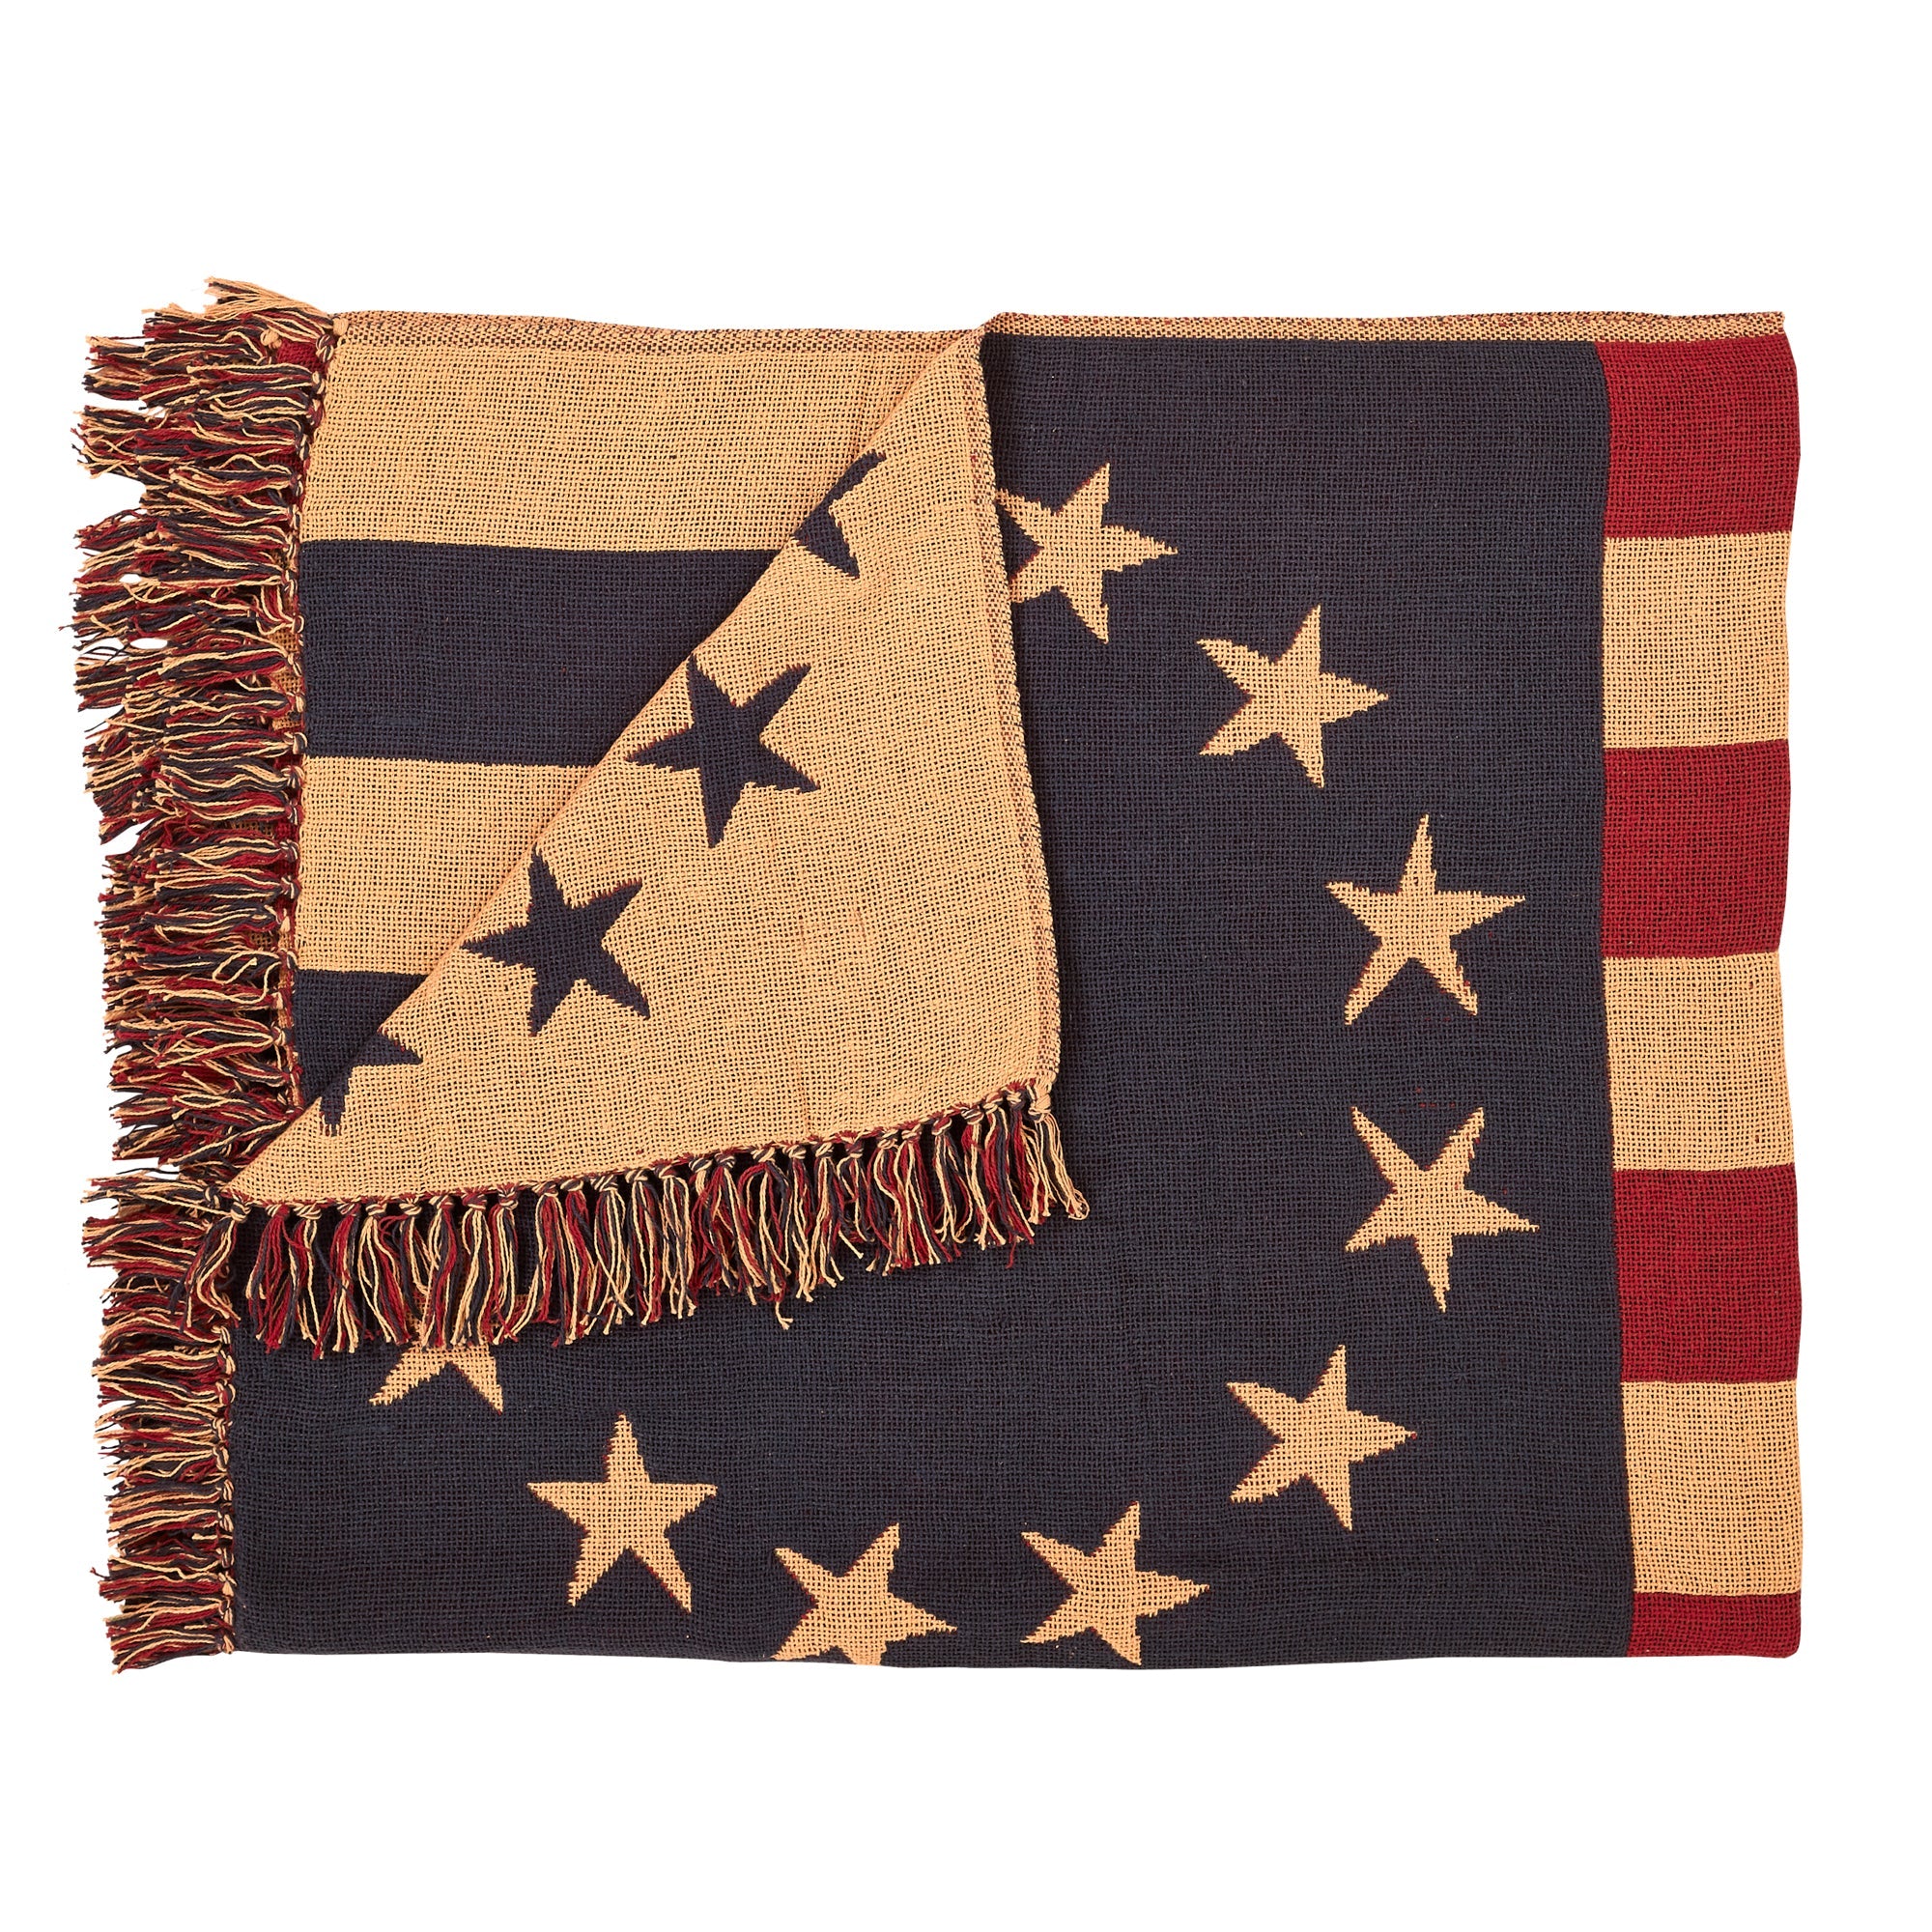 Old Glory Patriotic American Flag Woven Throw 60" x 50" VHC Brands